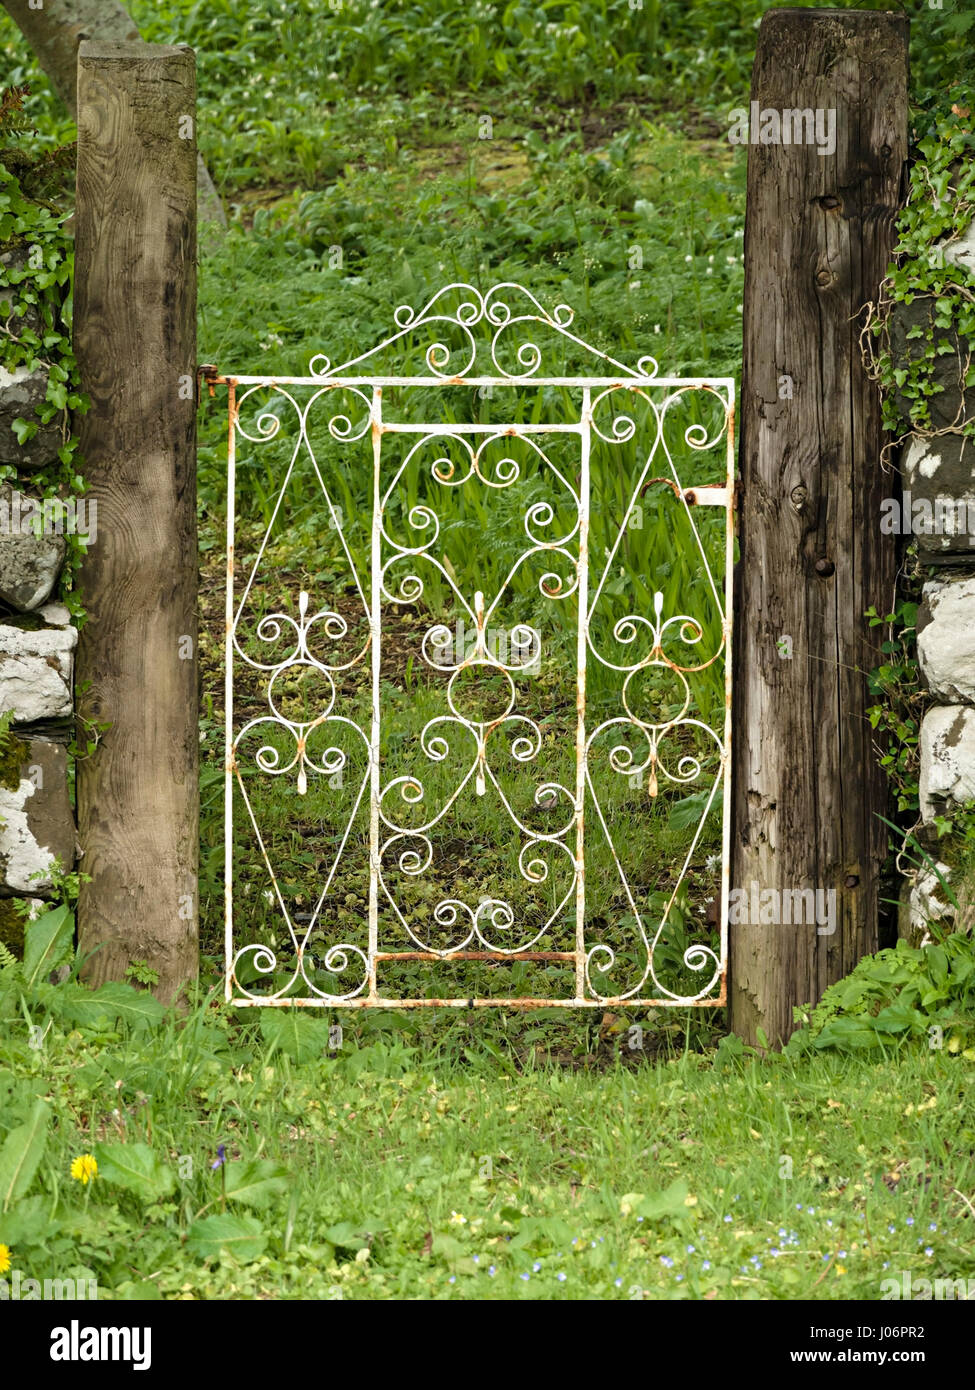 Old, white painted, ornate, wrought iron garden gate with swirls between wooden posts  with green grass. Stock Photo